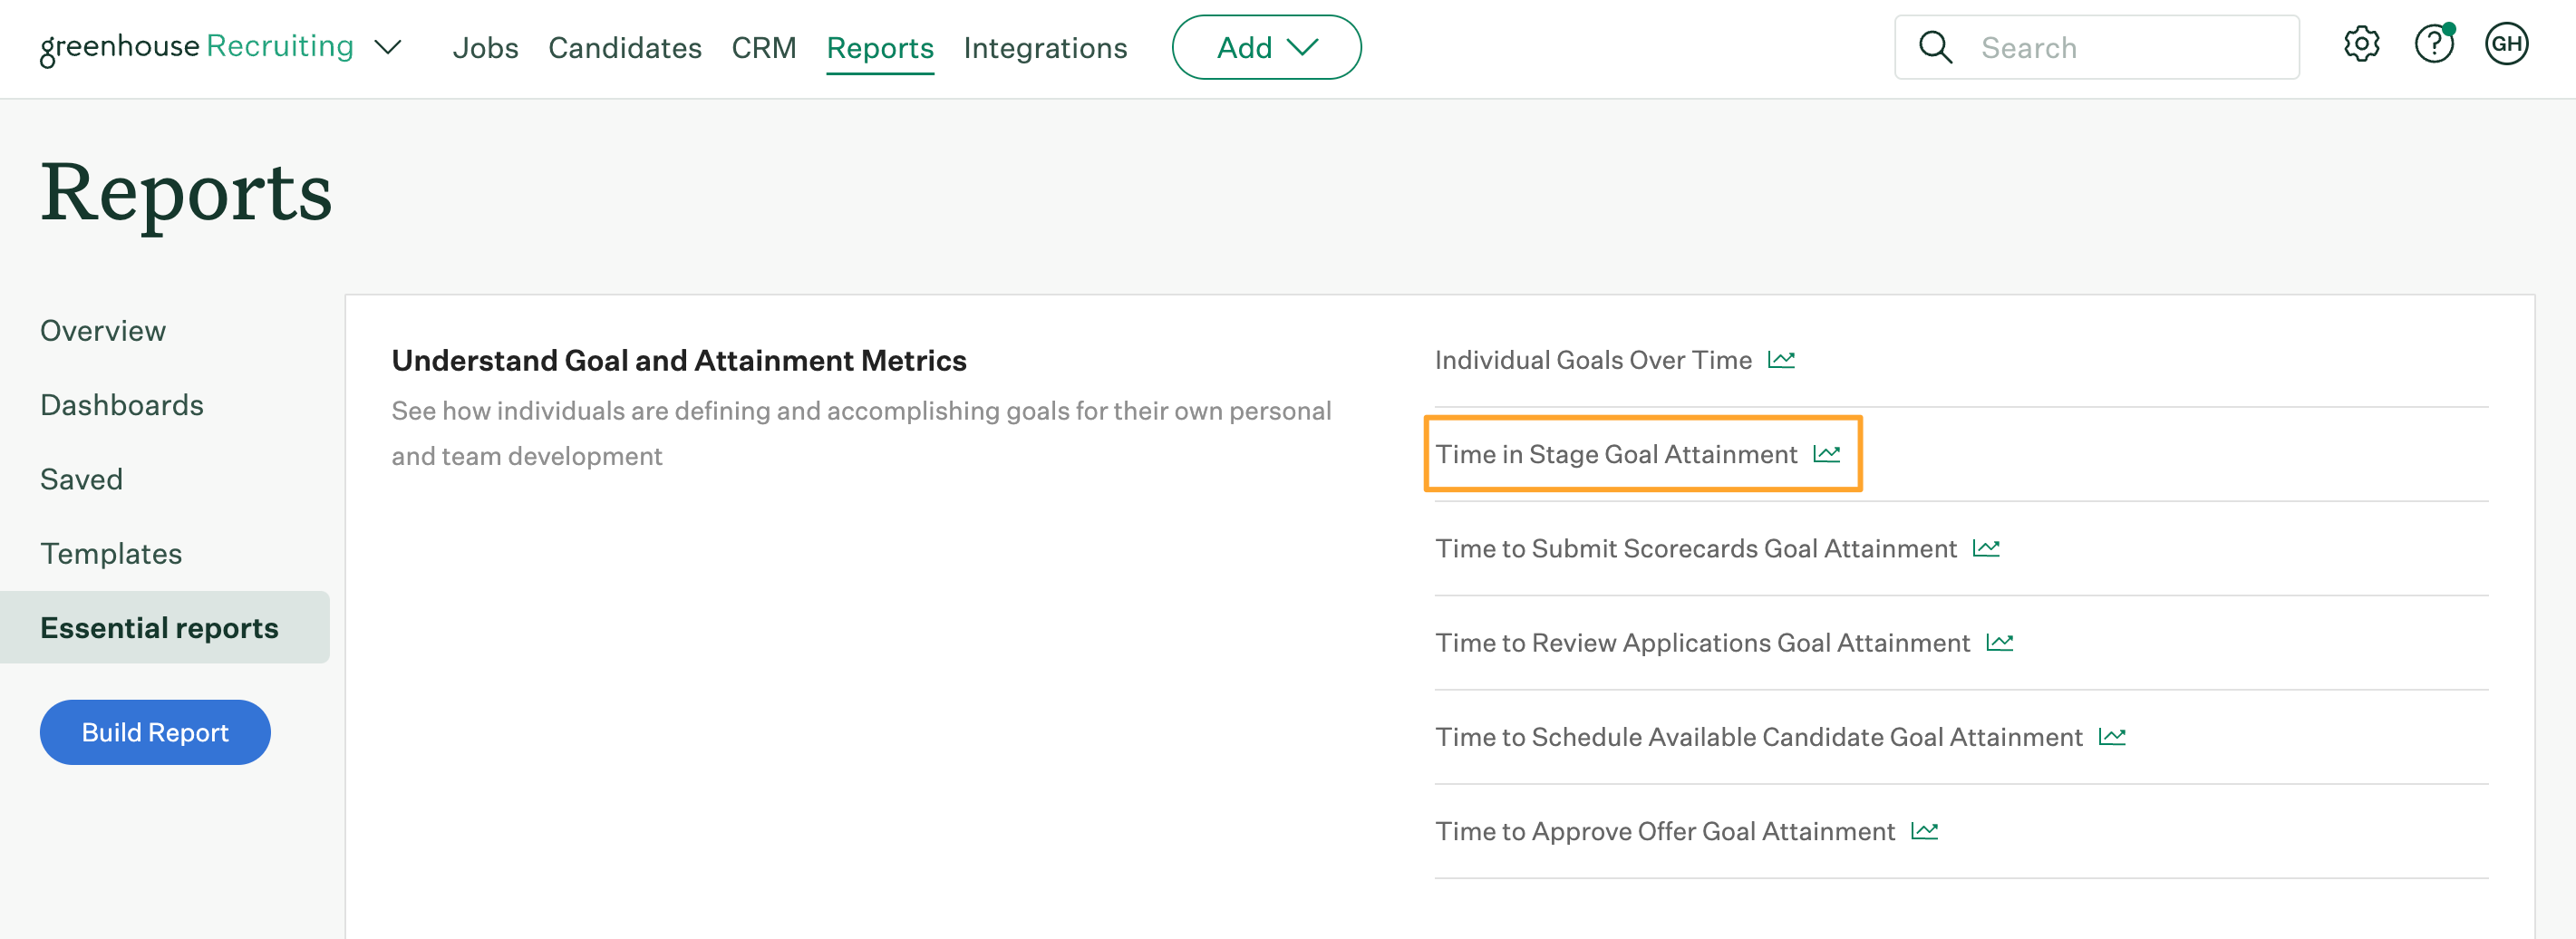 Time-in-stage-goal-attainment-report-highlighted-on-essential-reports-page.png